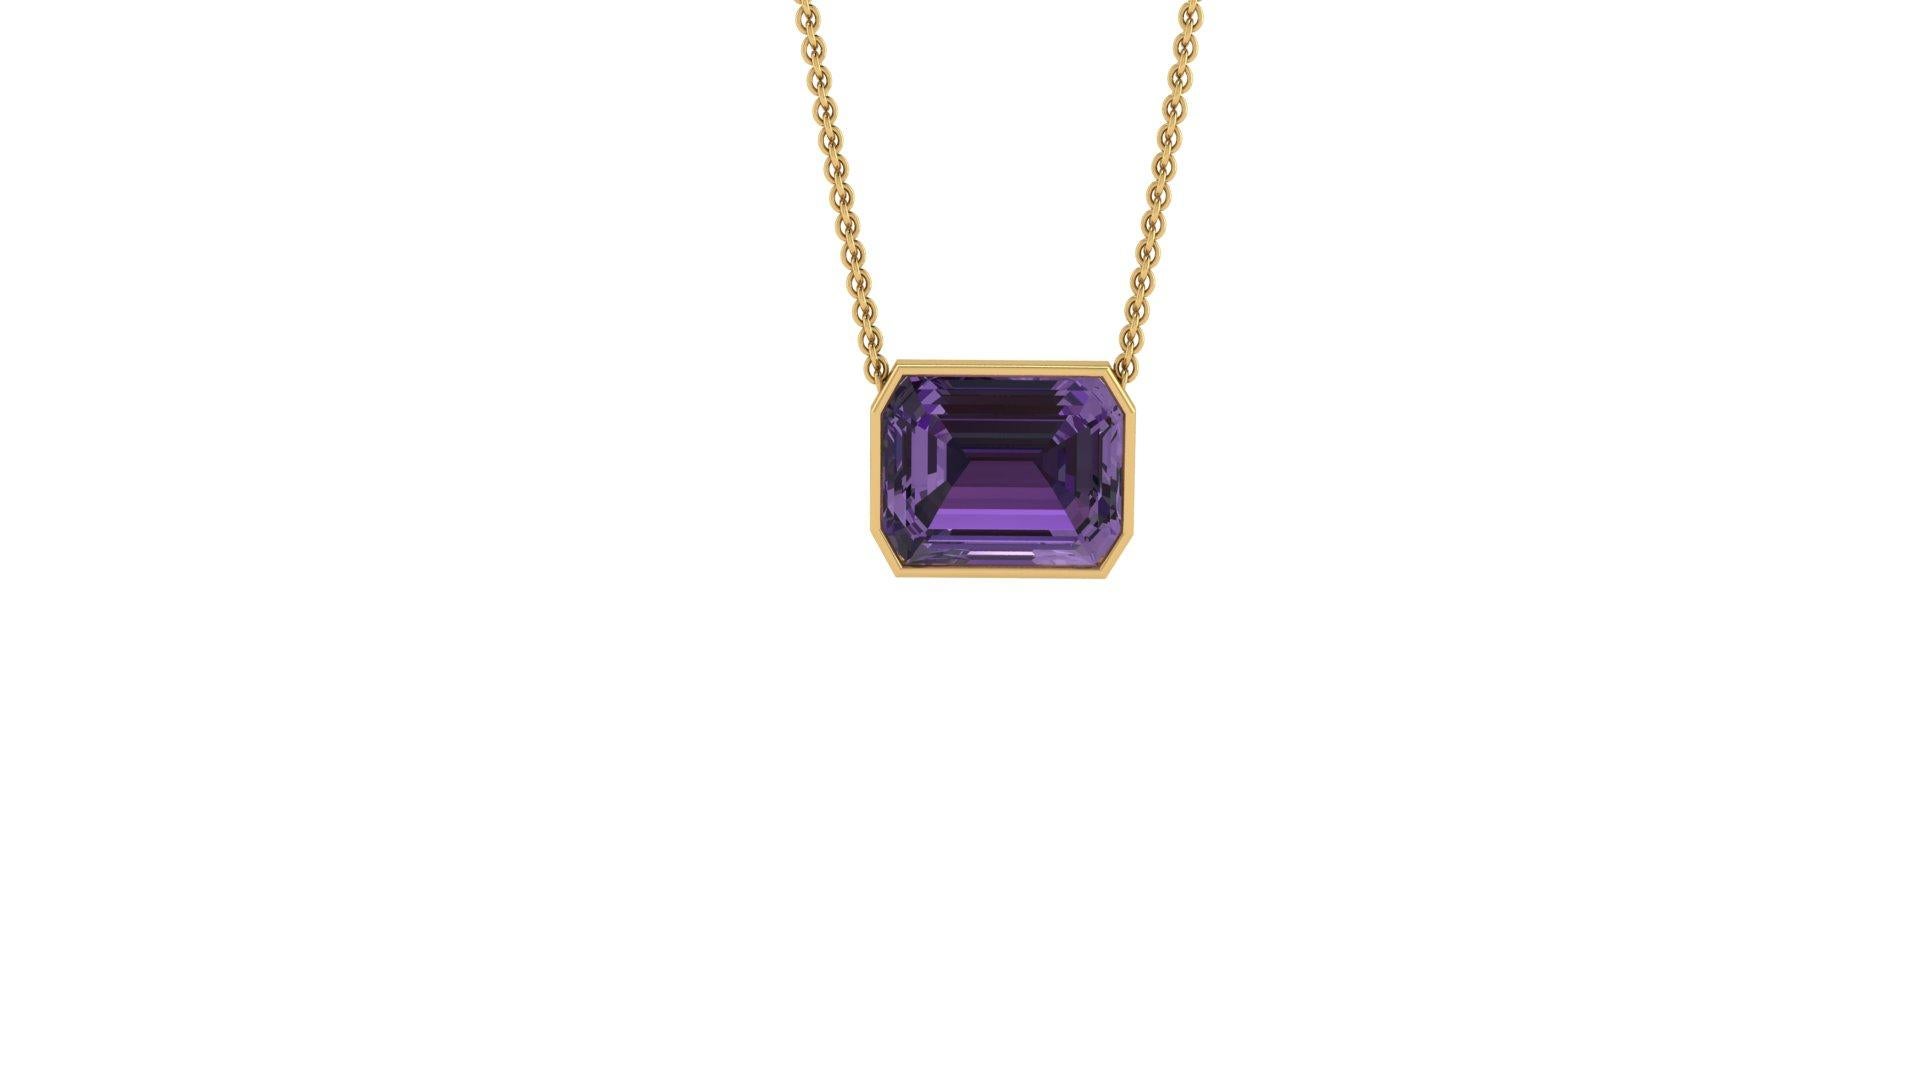 10 Carat Emerald cut Amethyst in 18K Yellow gold thin bezel Necklace Pendant
The necklace length can be adjusted at 18